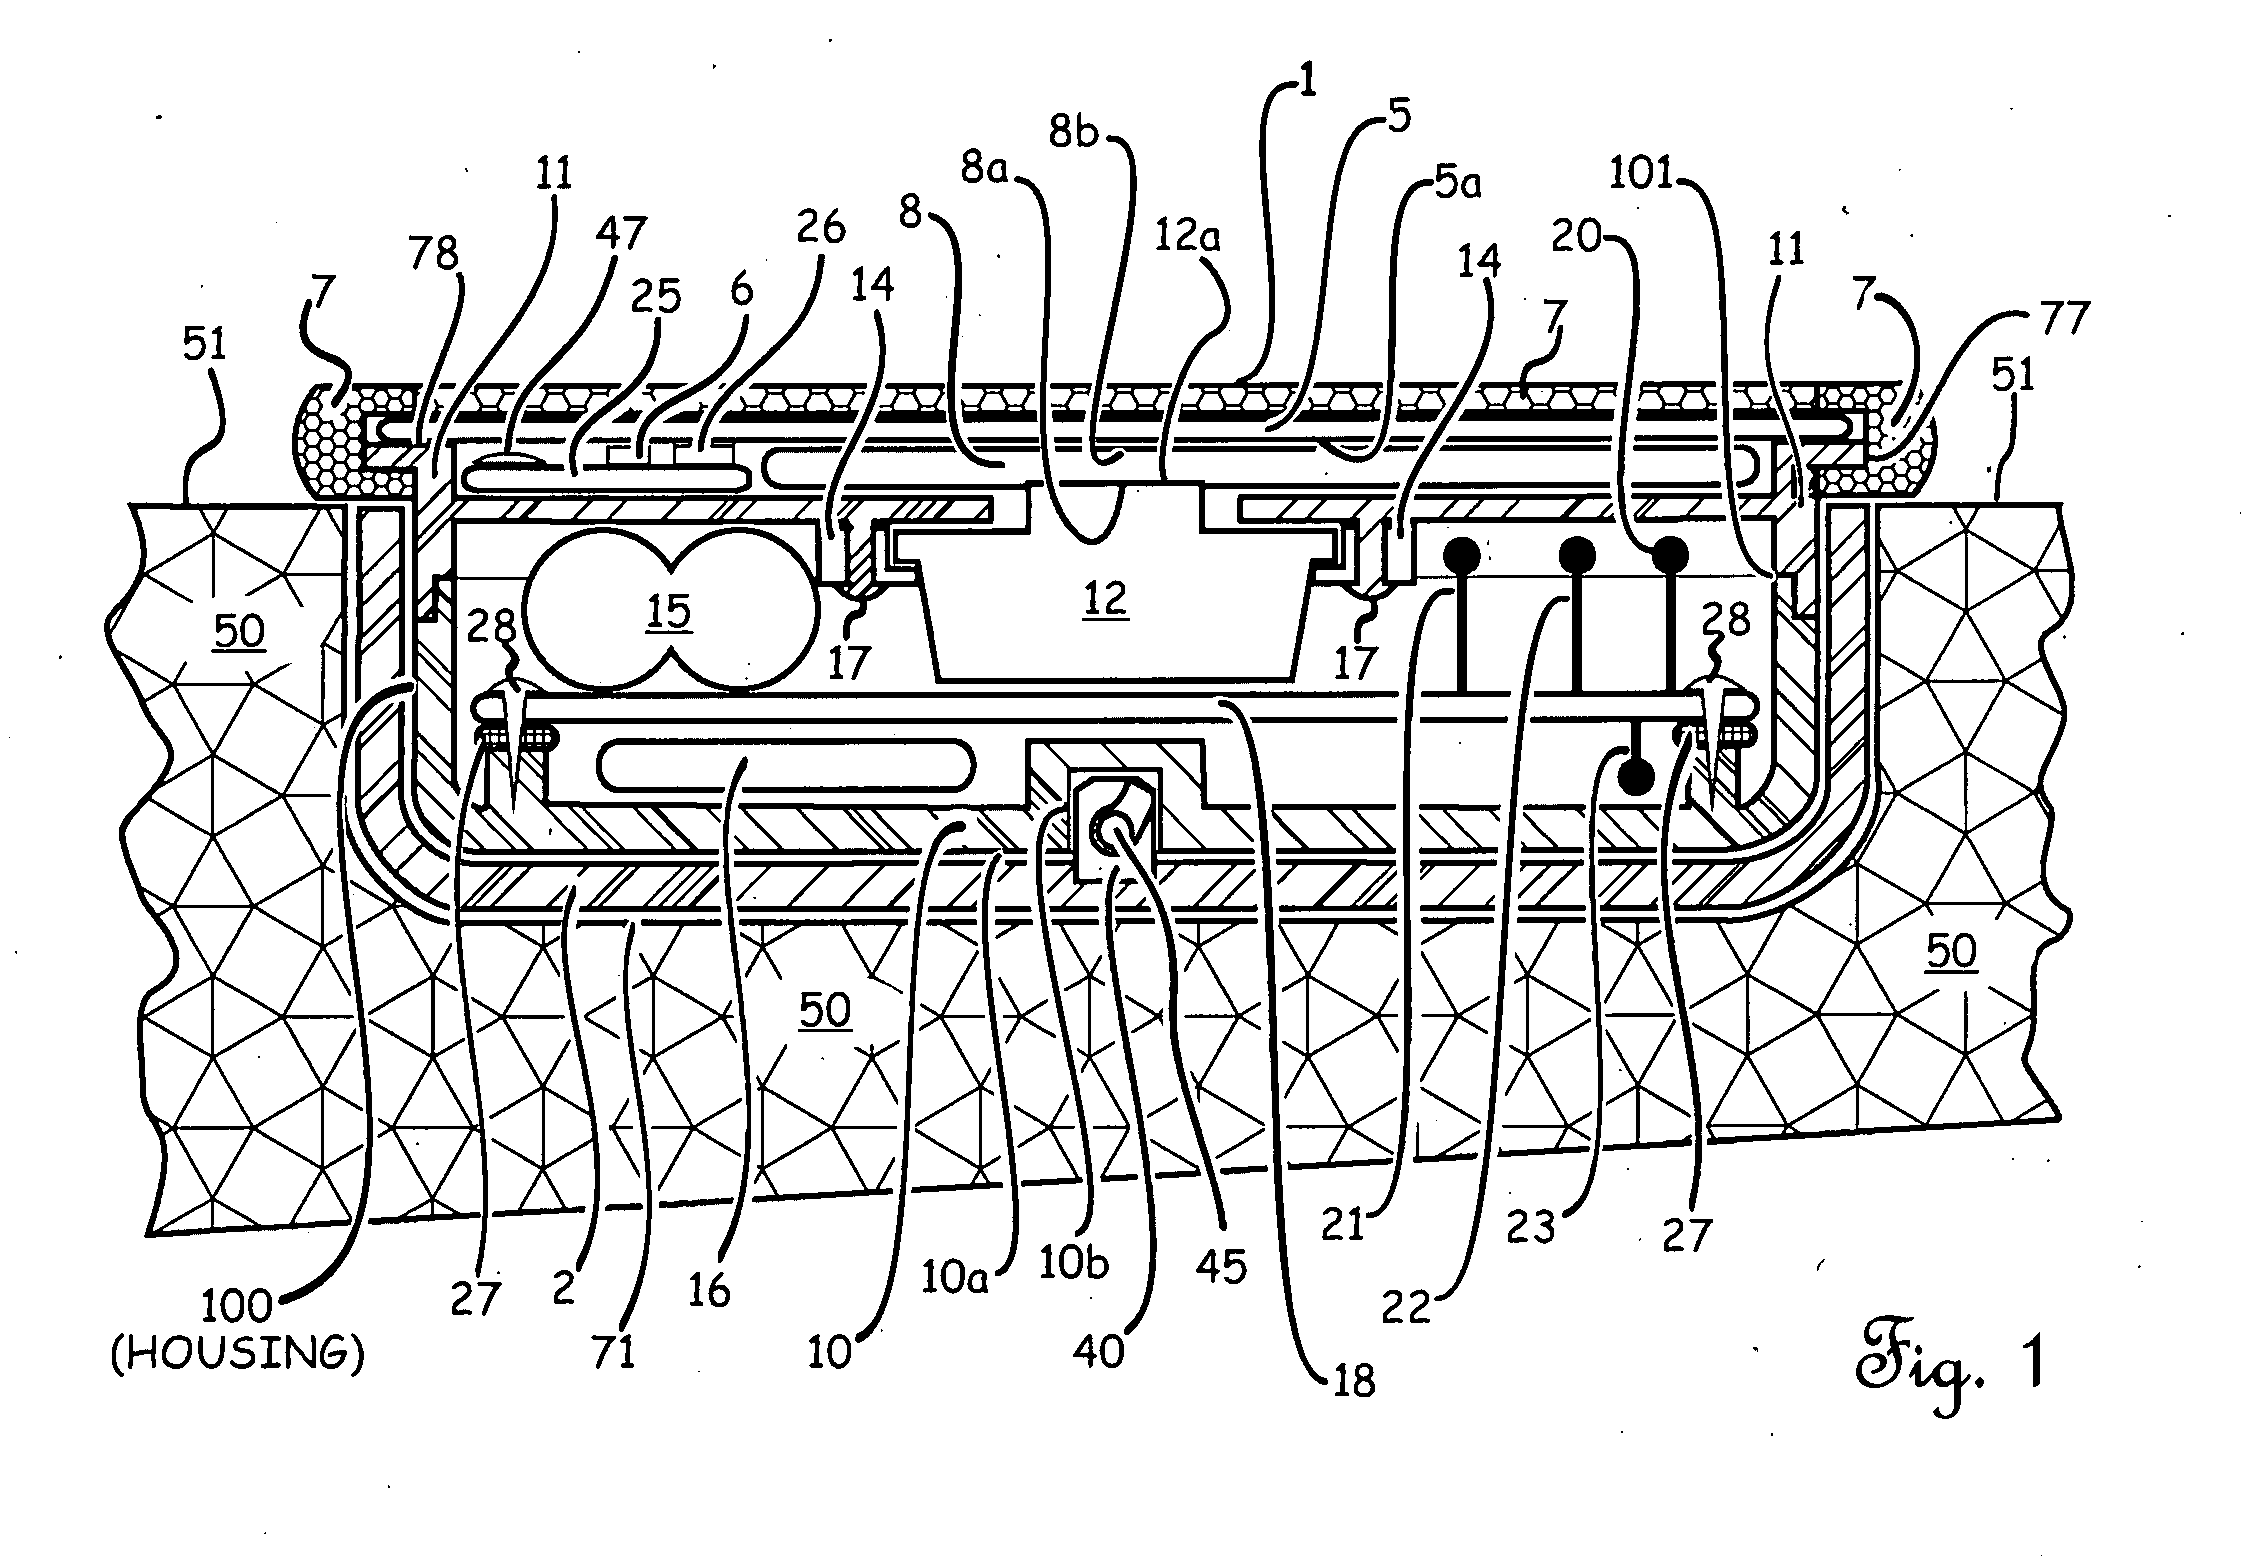 Sports audio player and two-way voice/data communication device